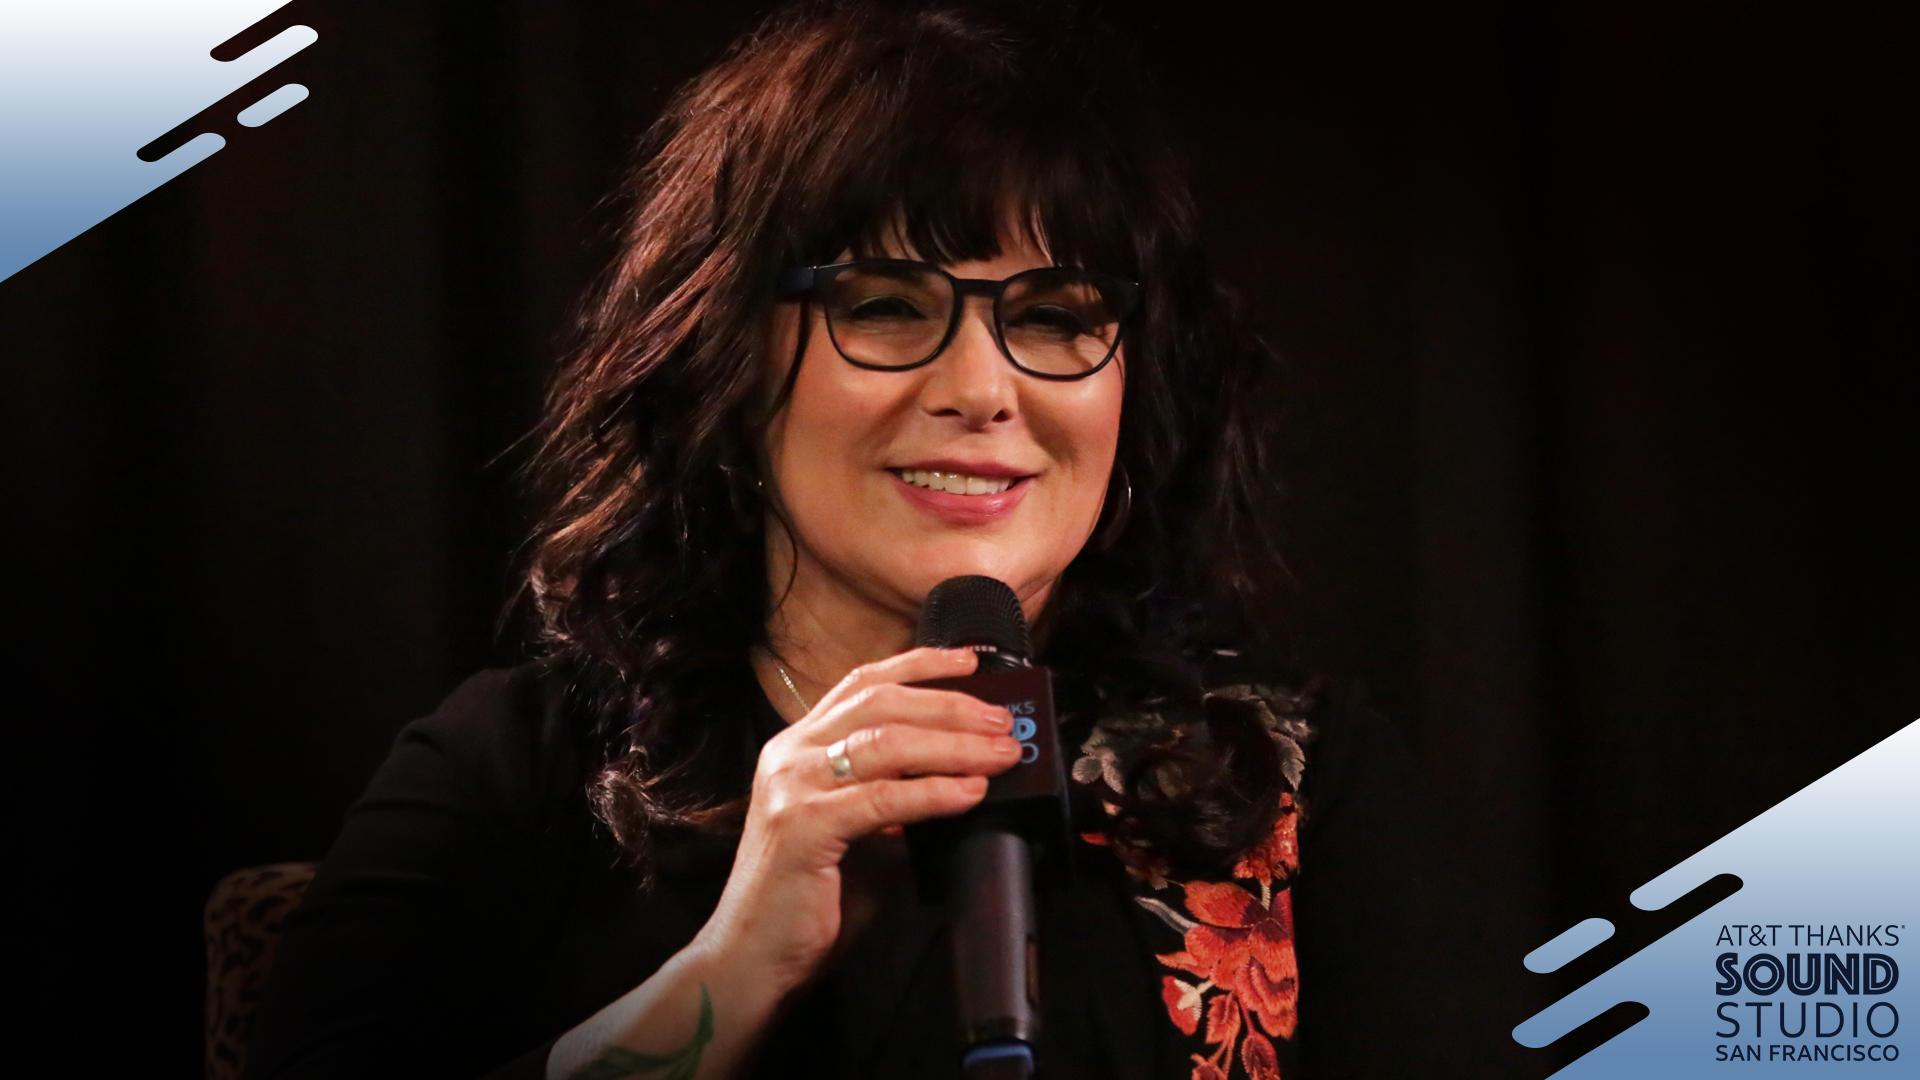 Ann Wilson talks Vocal Training, Her Love of People, and Much More.